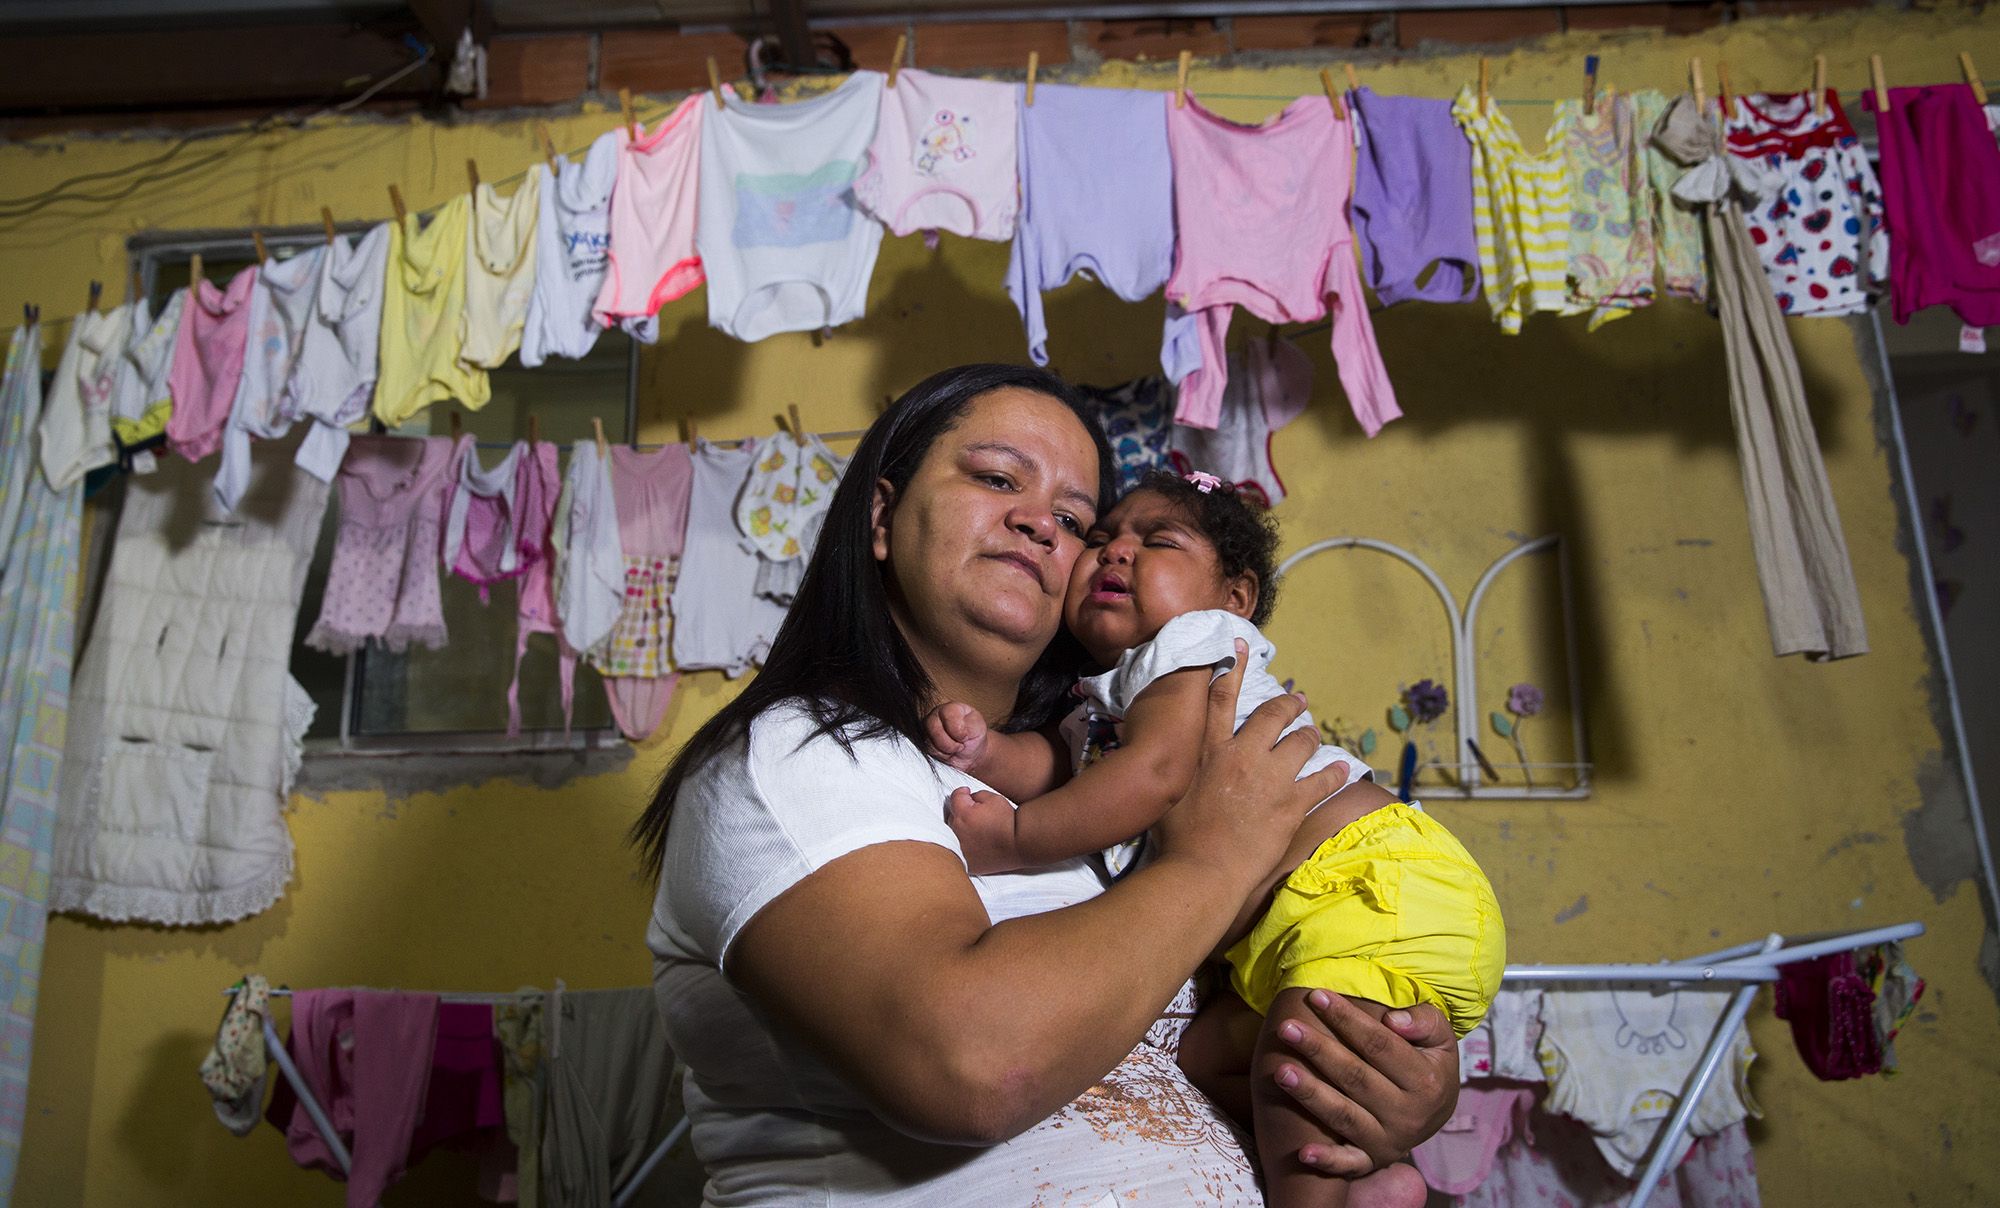 Fabiane Lopes holds her daughter, Valentina at their home in Duque de Caxias, a suburb of Rio de Janeiro in southeastern Brazil. Valentina's mother was pregnant when she became infected with the Zika virus and her daughter was born with microcephaly—a congenital malformation with smaller than normal head size for age and sex as well as other profound birth defects. Brazil has confirmed far more malformations of the brain in babies born to mothers who were infected with Zika than any other country. After she gave birth to Valentina, she elected to have a tubal ligation so she could not become pregnant again. Image by Mark Hoffman. Brazil, 2017.